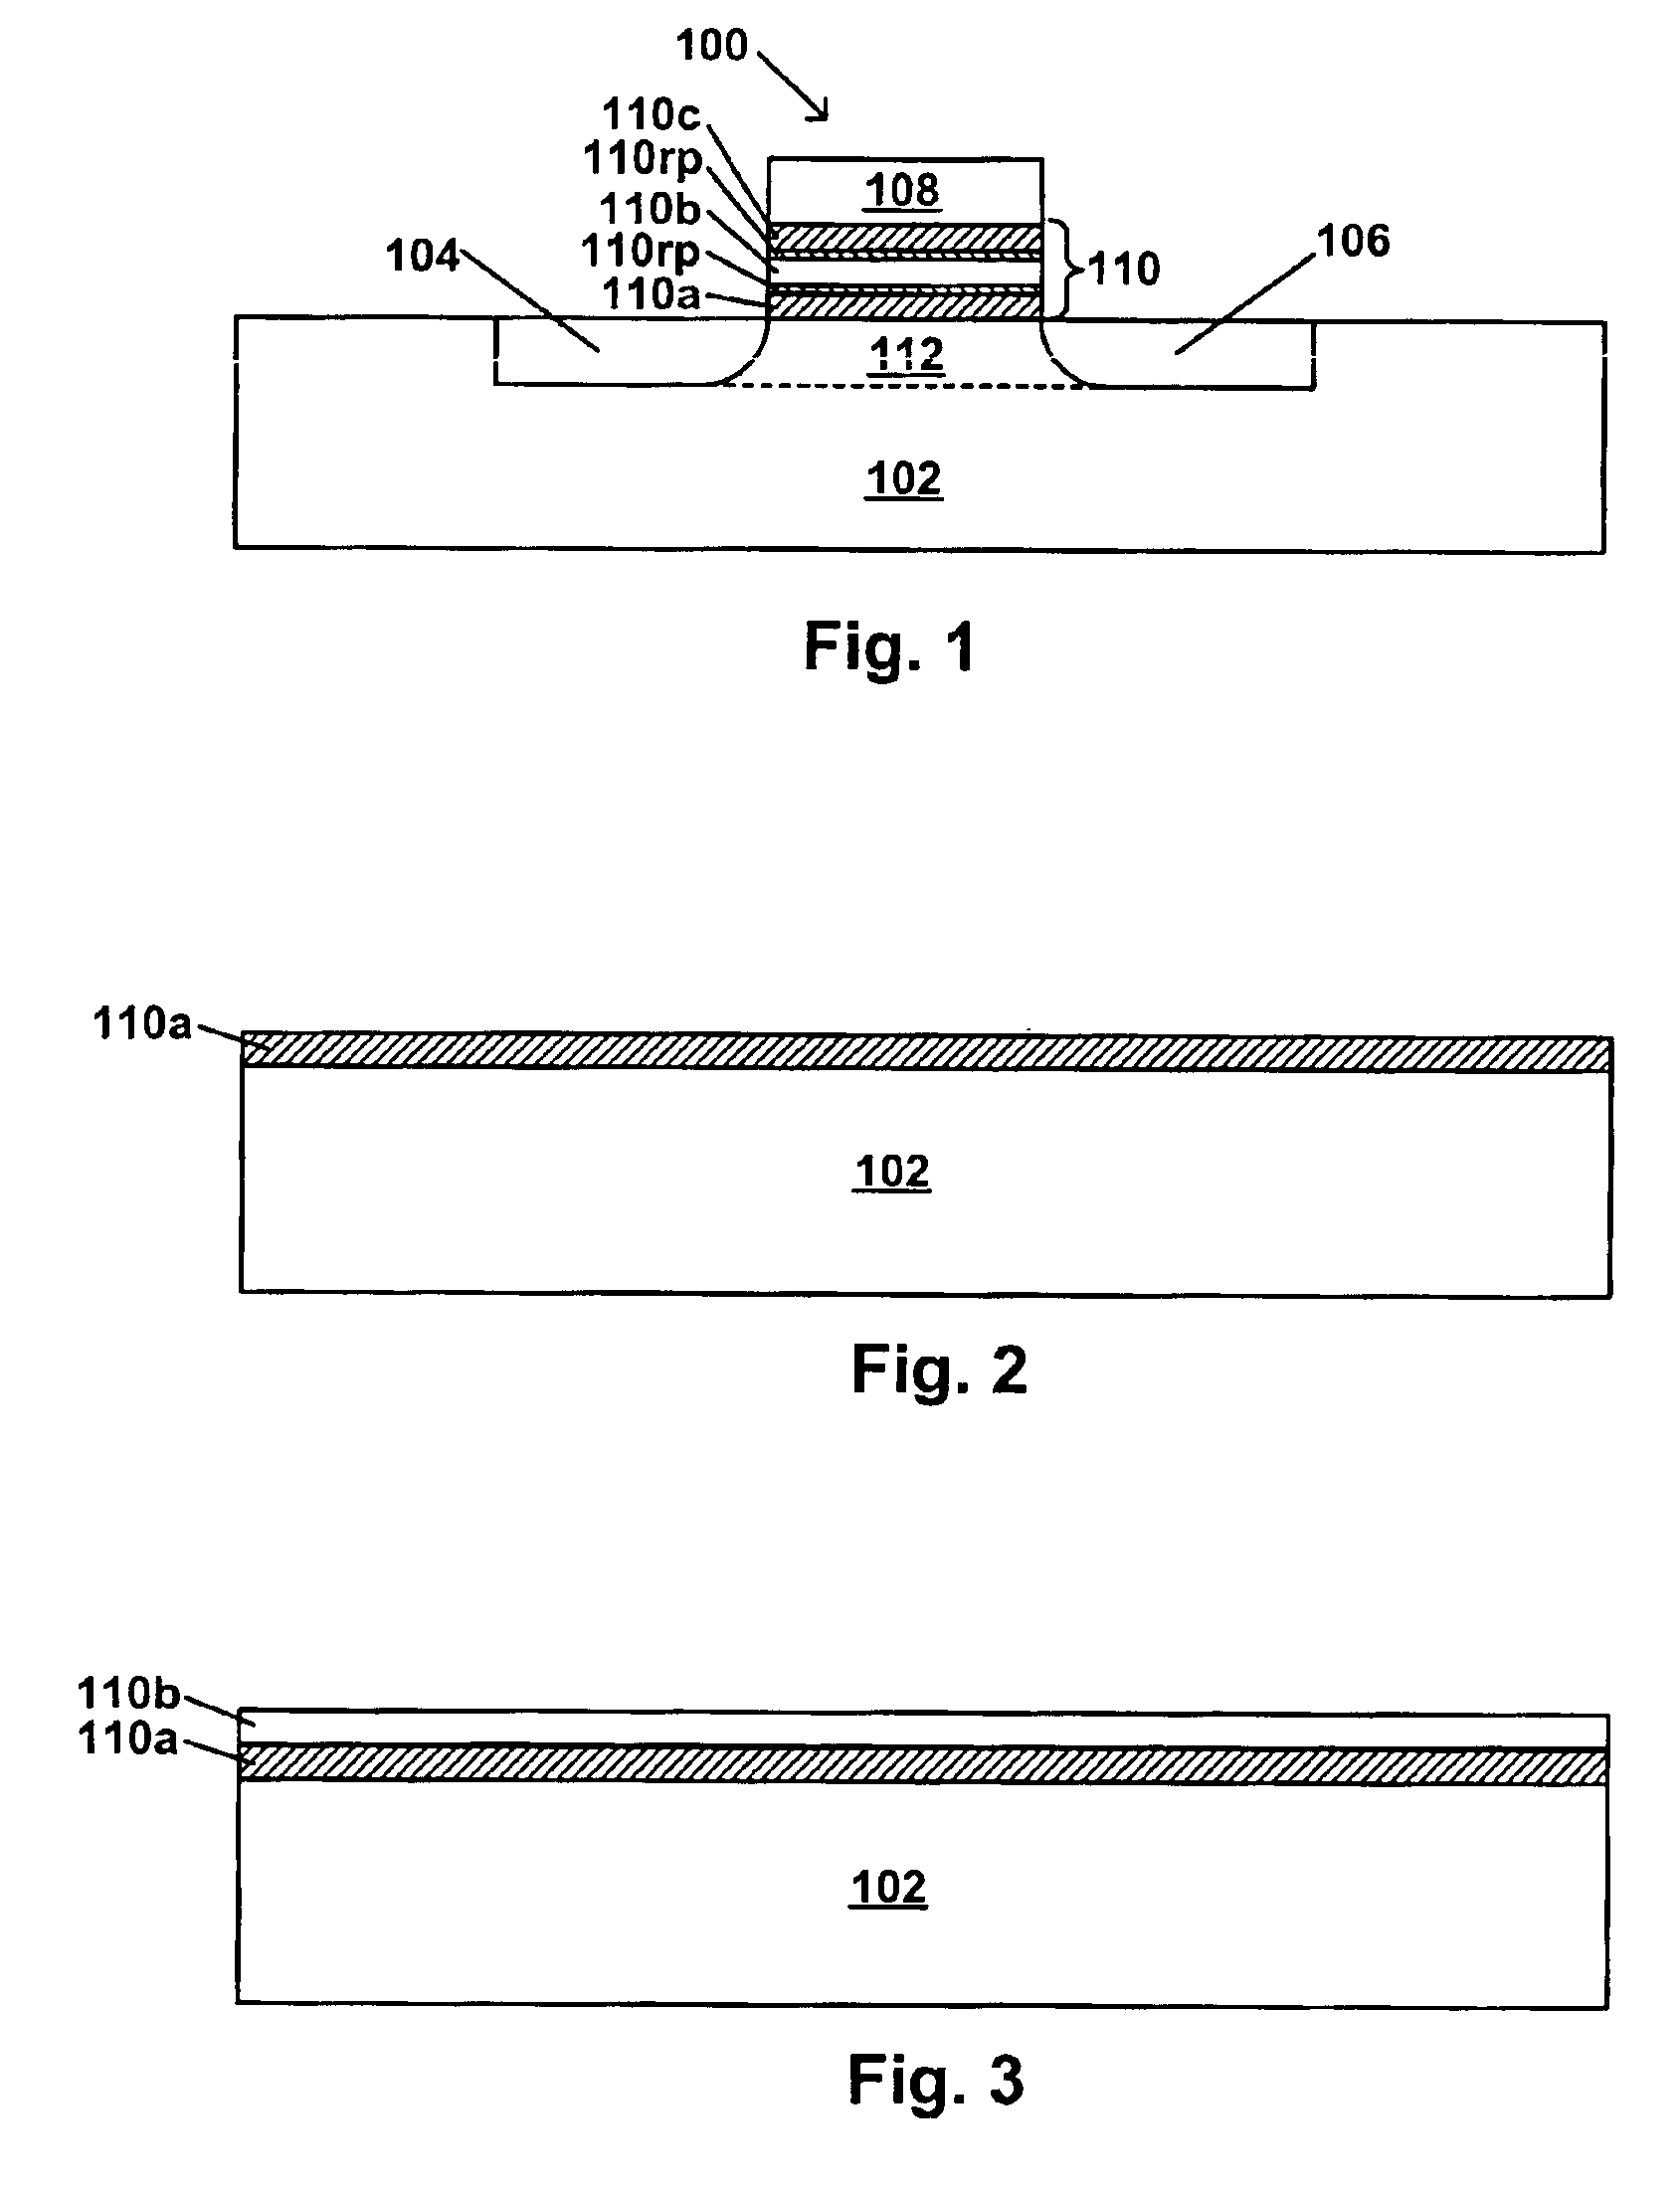 Preparation of composite high-K/standard-K dielectrics for semiconductor devices